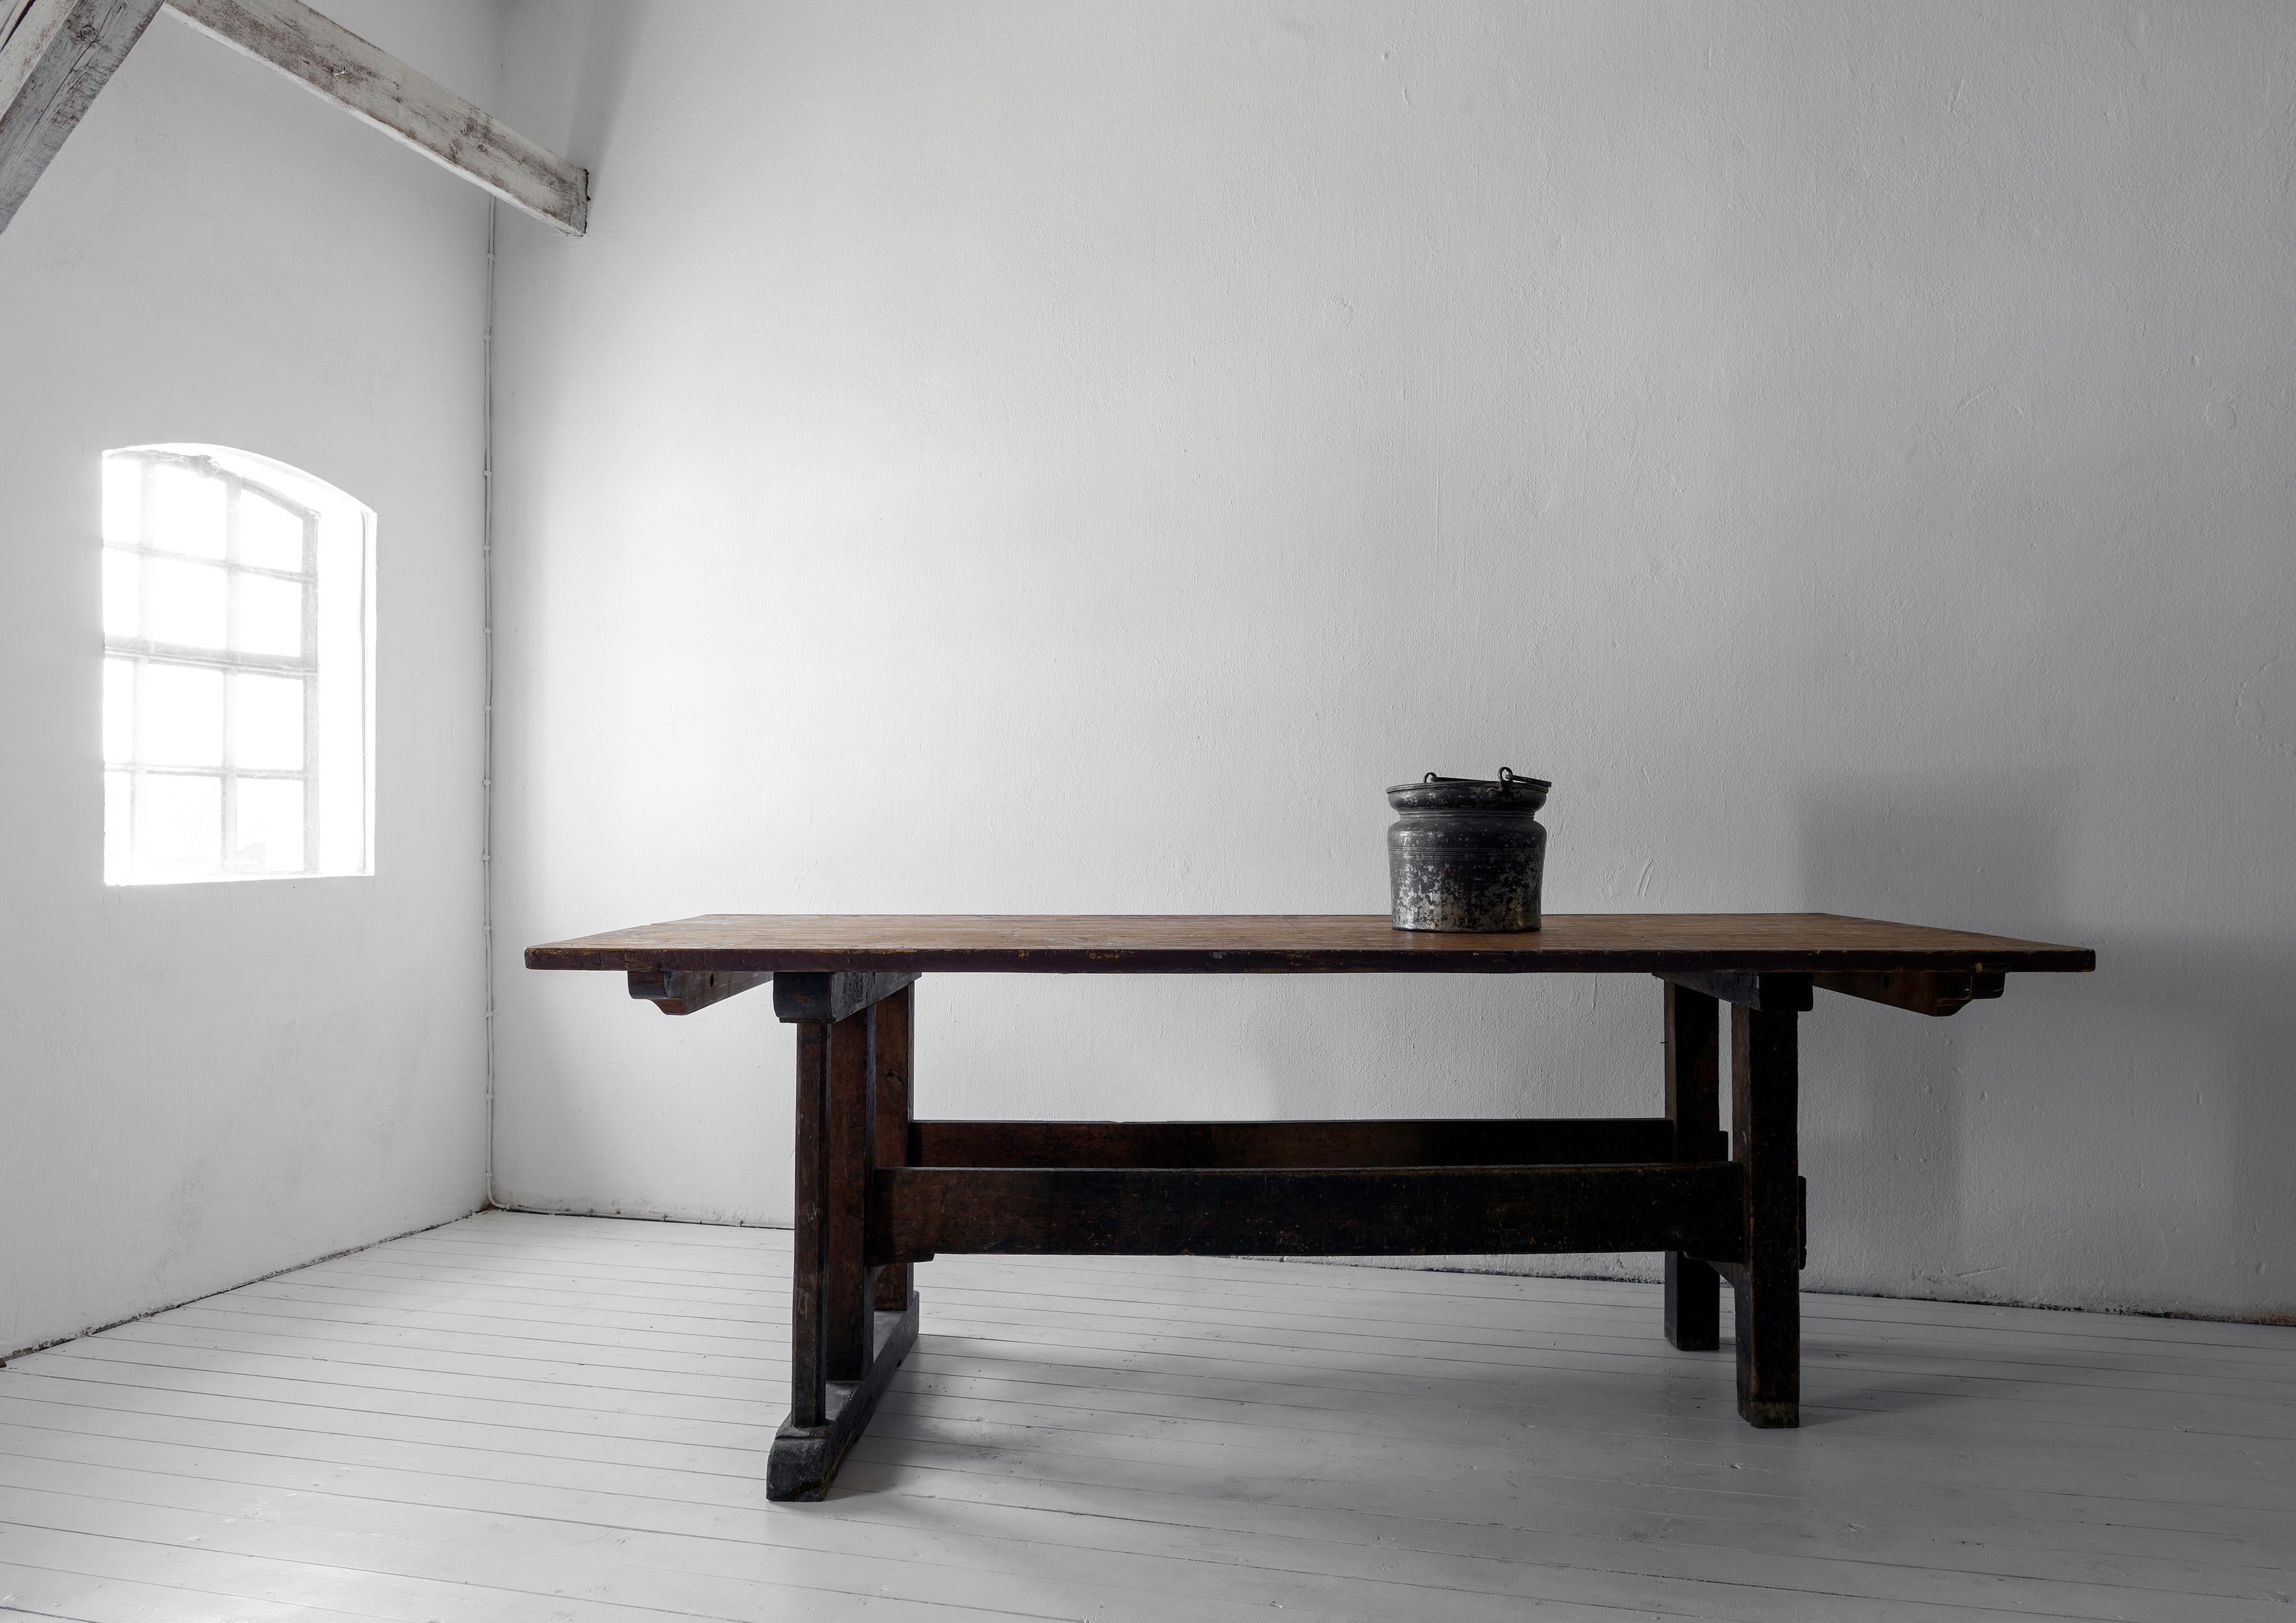 Industrial Minimal Wabi Sabi Dining Table or Desk with Remains of Original Paint